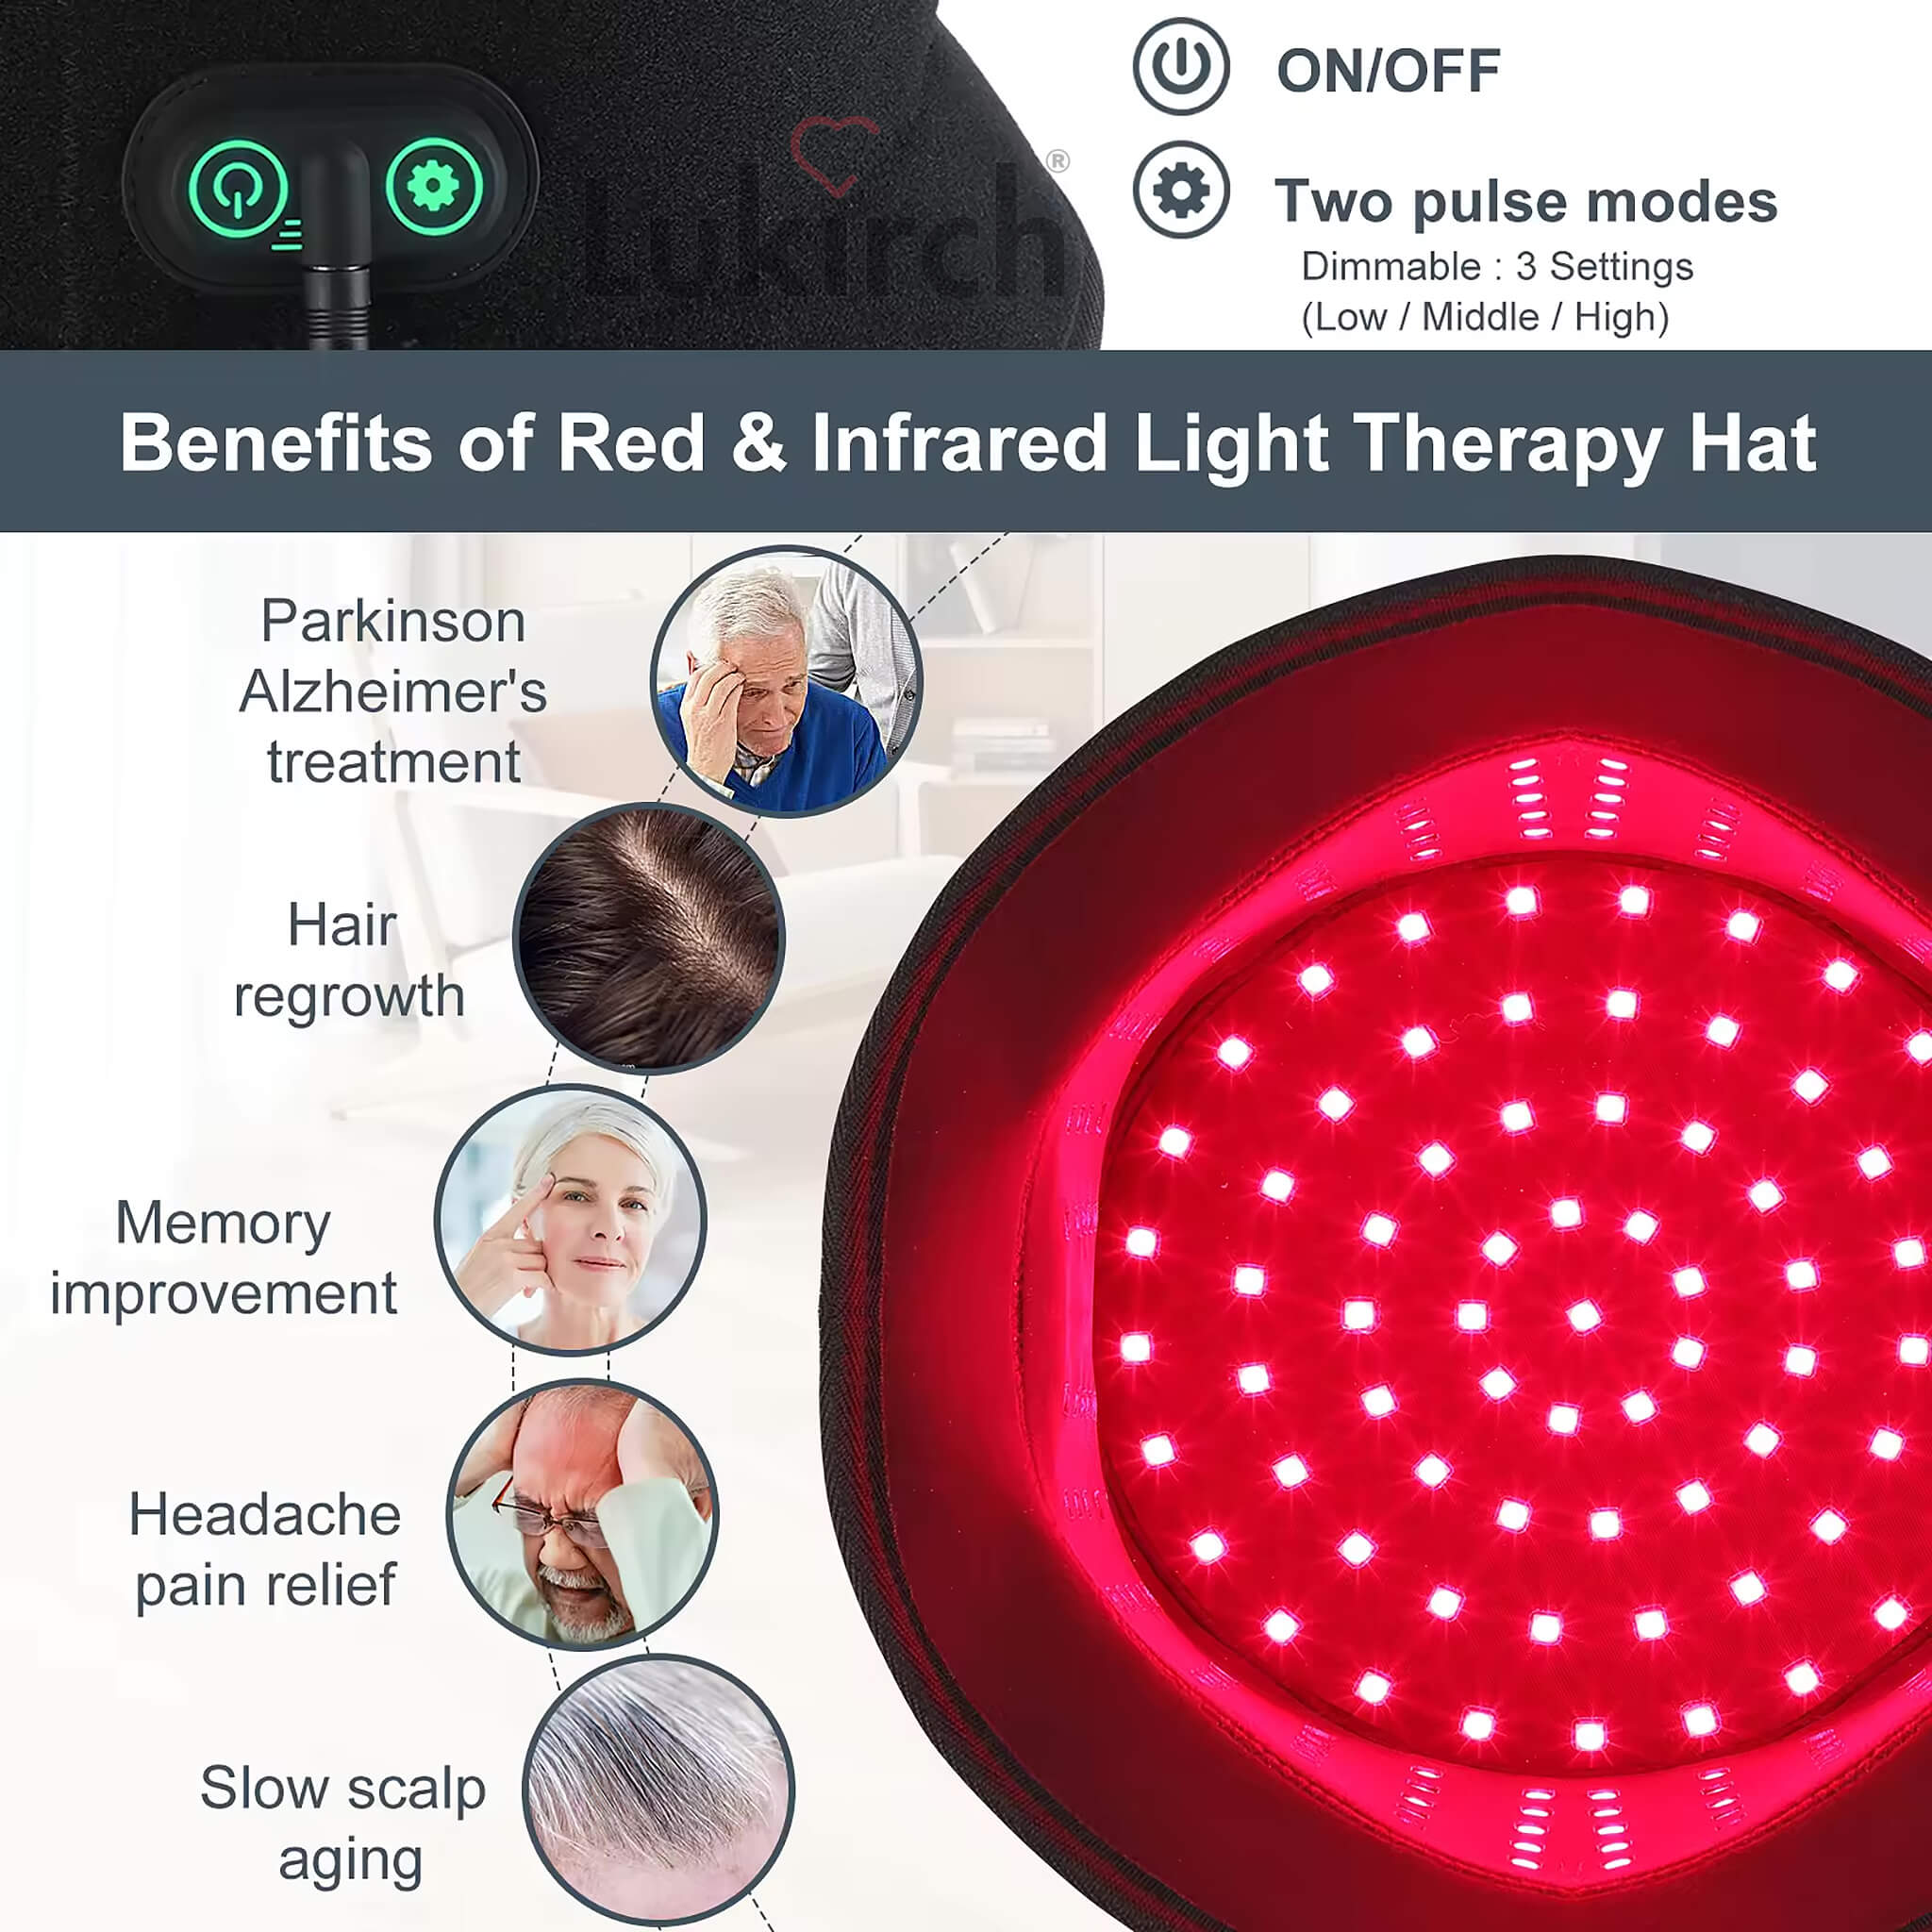 210 led red infrared light therapy device cap hat for parkinson alzheimer's treatment and hair regrowth, memory improvement